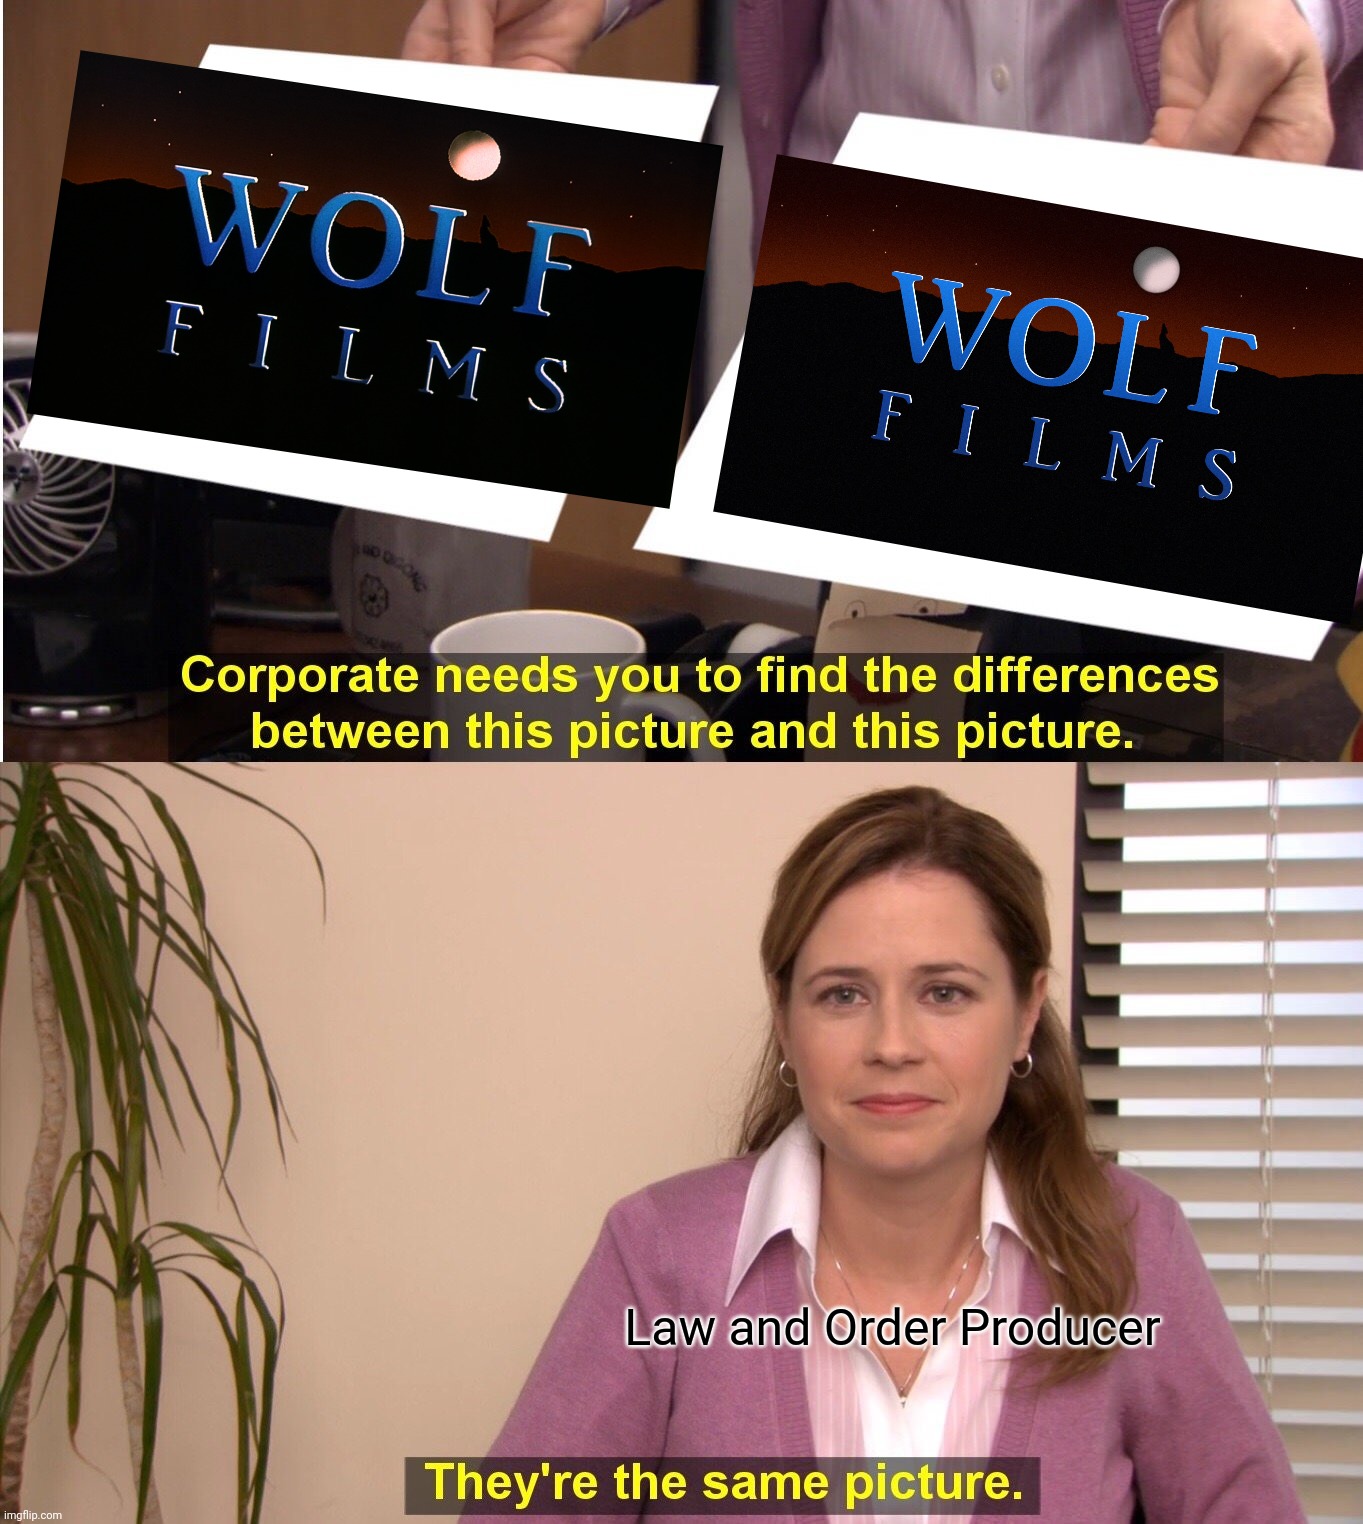 They're The Same Picture Meme | Law and Order Producer | image tagged in memes,they're the same picture,wolf films logo 1989-2011,funny,law and order,popular | made w/ Imgflip meme maker